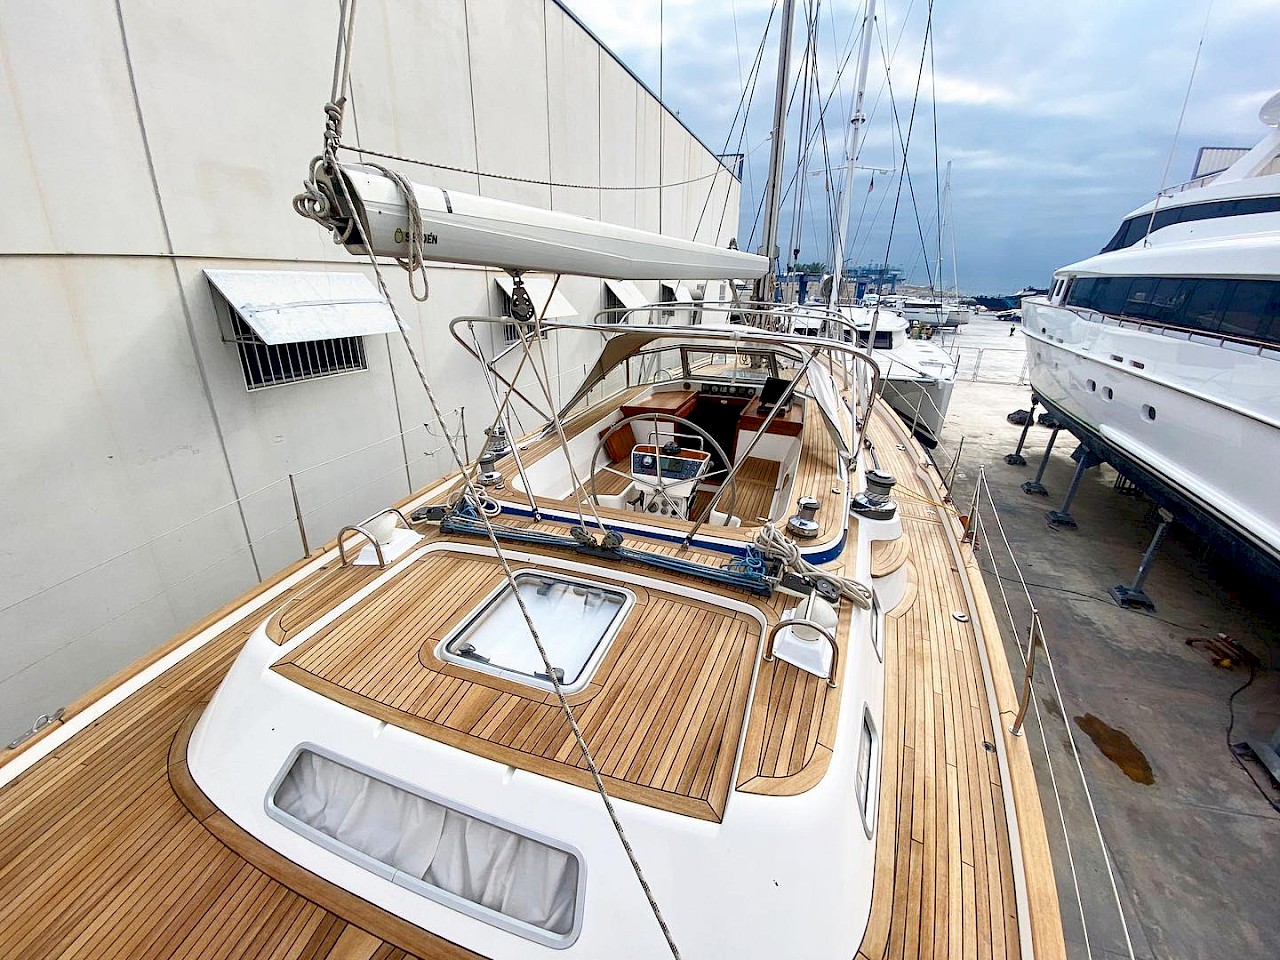 We will help you sell your yacht quickly and take care of its current costs.